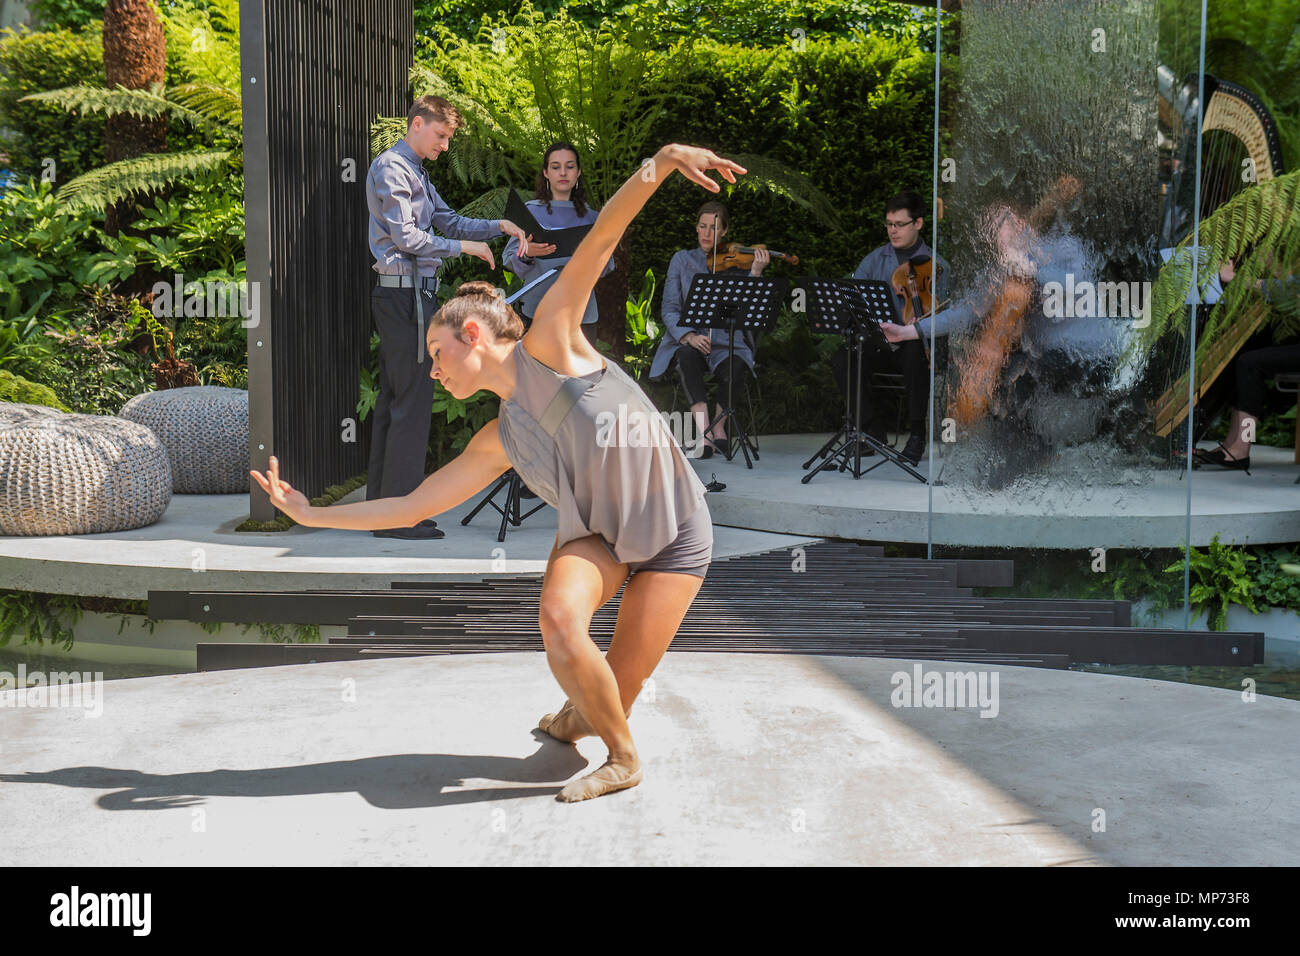 London, UK. 21st May 2018. Constella Opera Ballet perform a unique piece within the VTB Capital Spirit of Cornwall Garden, designed by Stuart Charles Towner and inspired by the work of sculptor Barbara Hepworth with music by composer Leo Geyer - Press day at The RHS Chelsea Flower Show at the Royal Hospital, Chelsea. Credit: Guy Bell/Alamy Live News Stock Photo